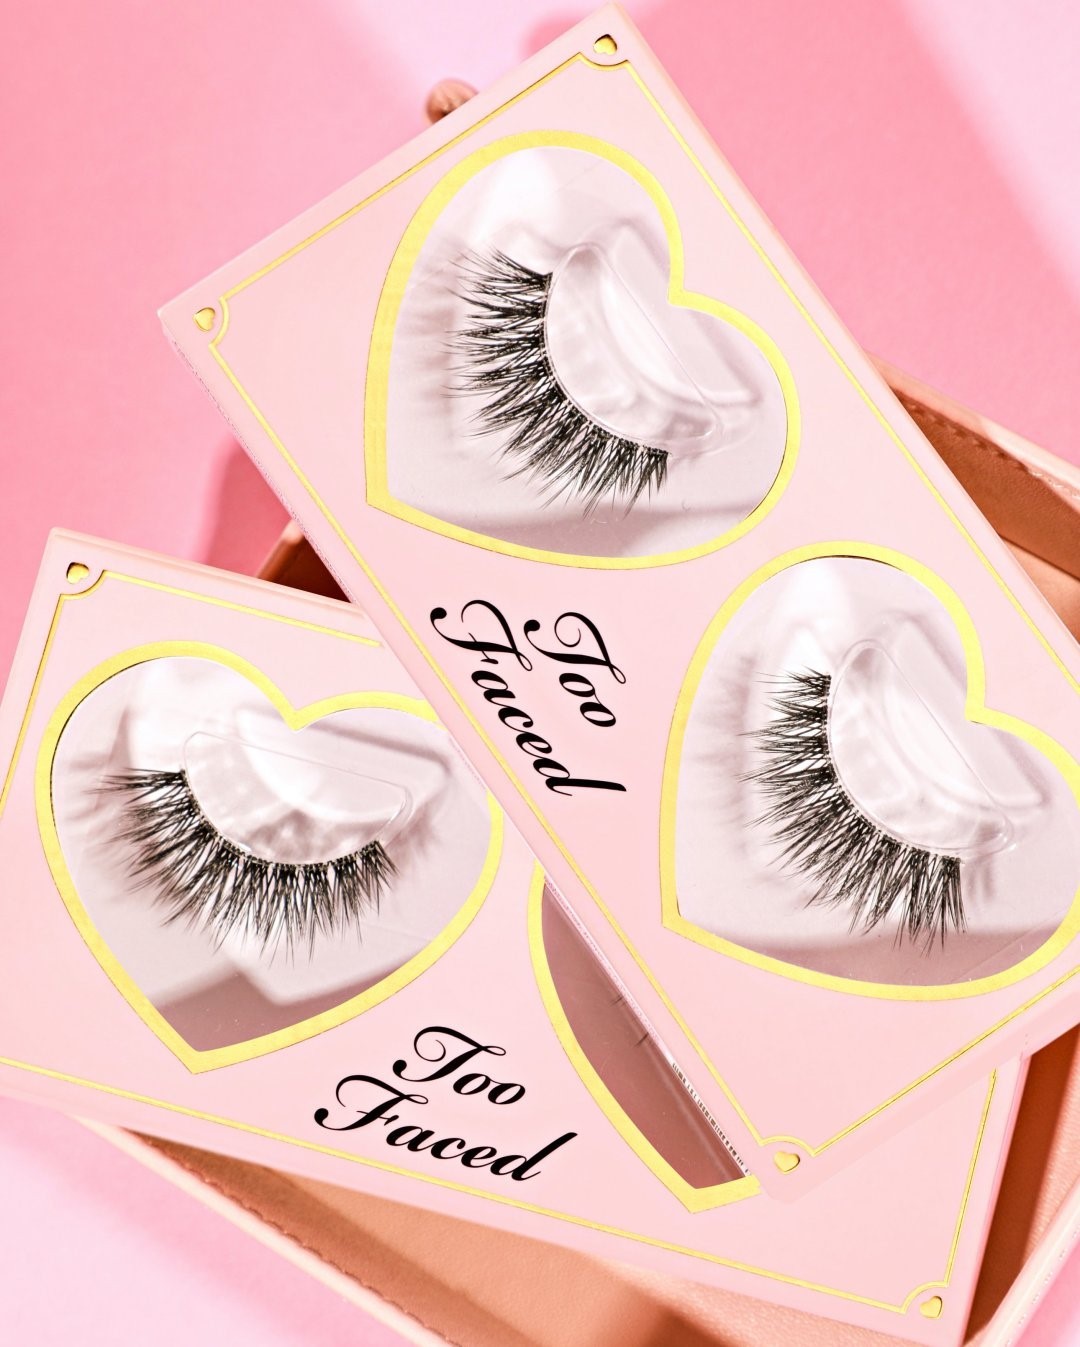 Too Faced Cosmetics - Turn up the girl next door factor with these effortlessly natural lashes! 💕 Our NEW Better Than Sex Lashes style Natural Flirt is perfect for every day glam, first dates, or a wa...